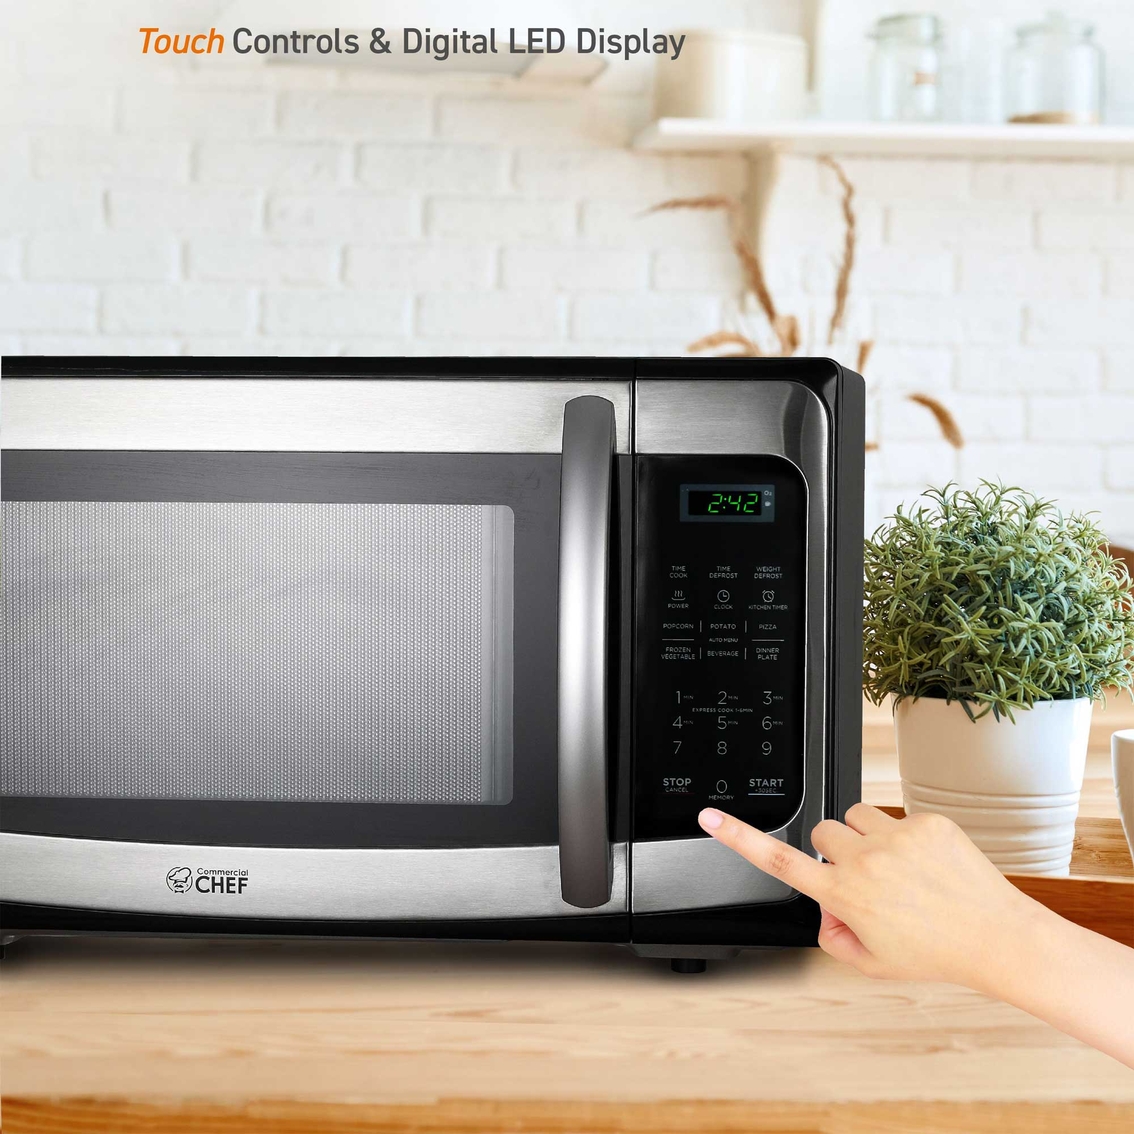 Commercial Chef 1.1 cu. ft. Countertop Microwave Oven - Image 6 of 7